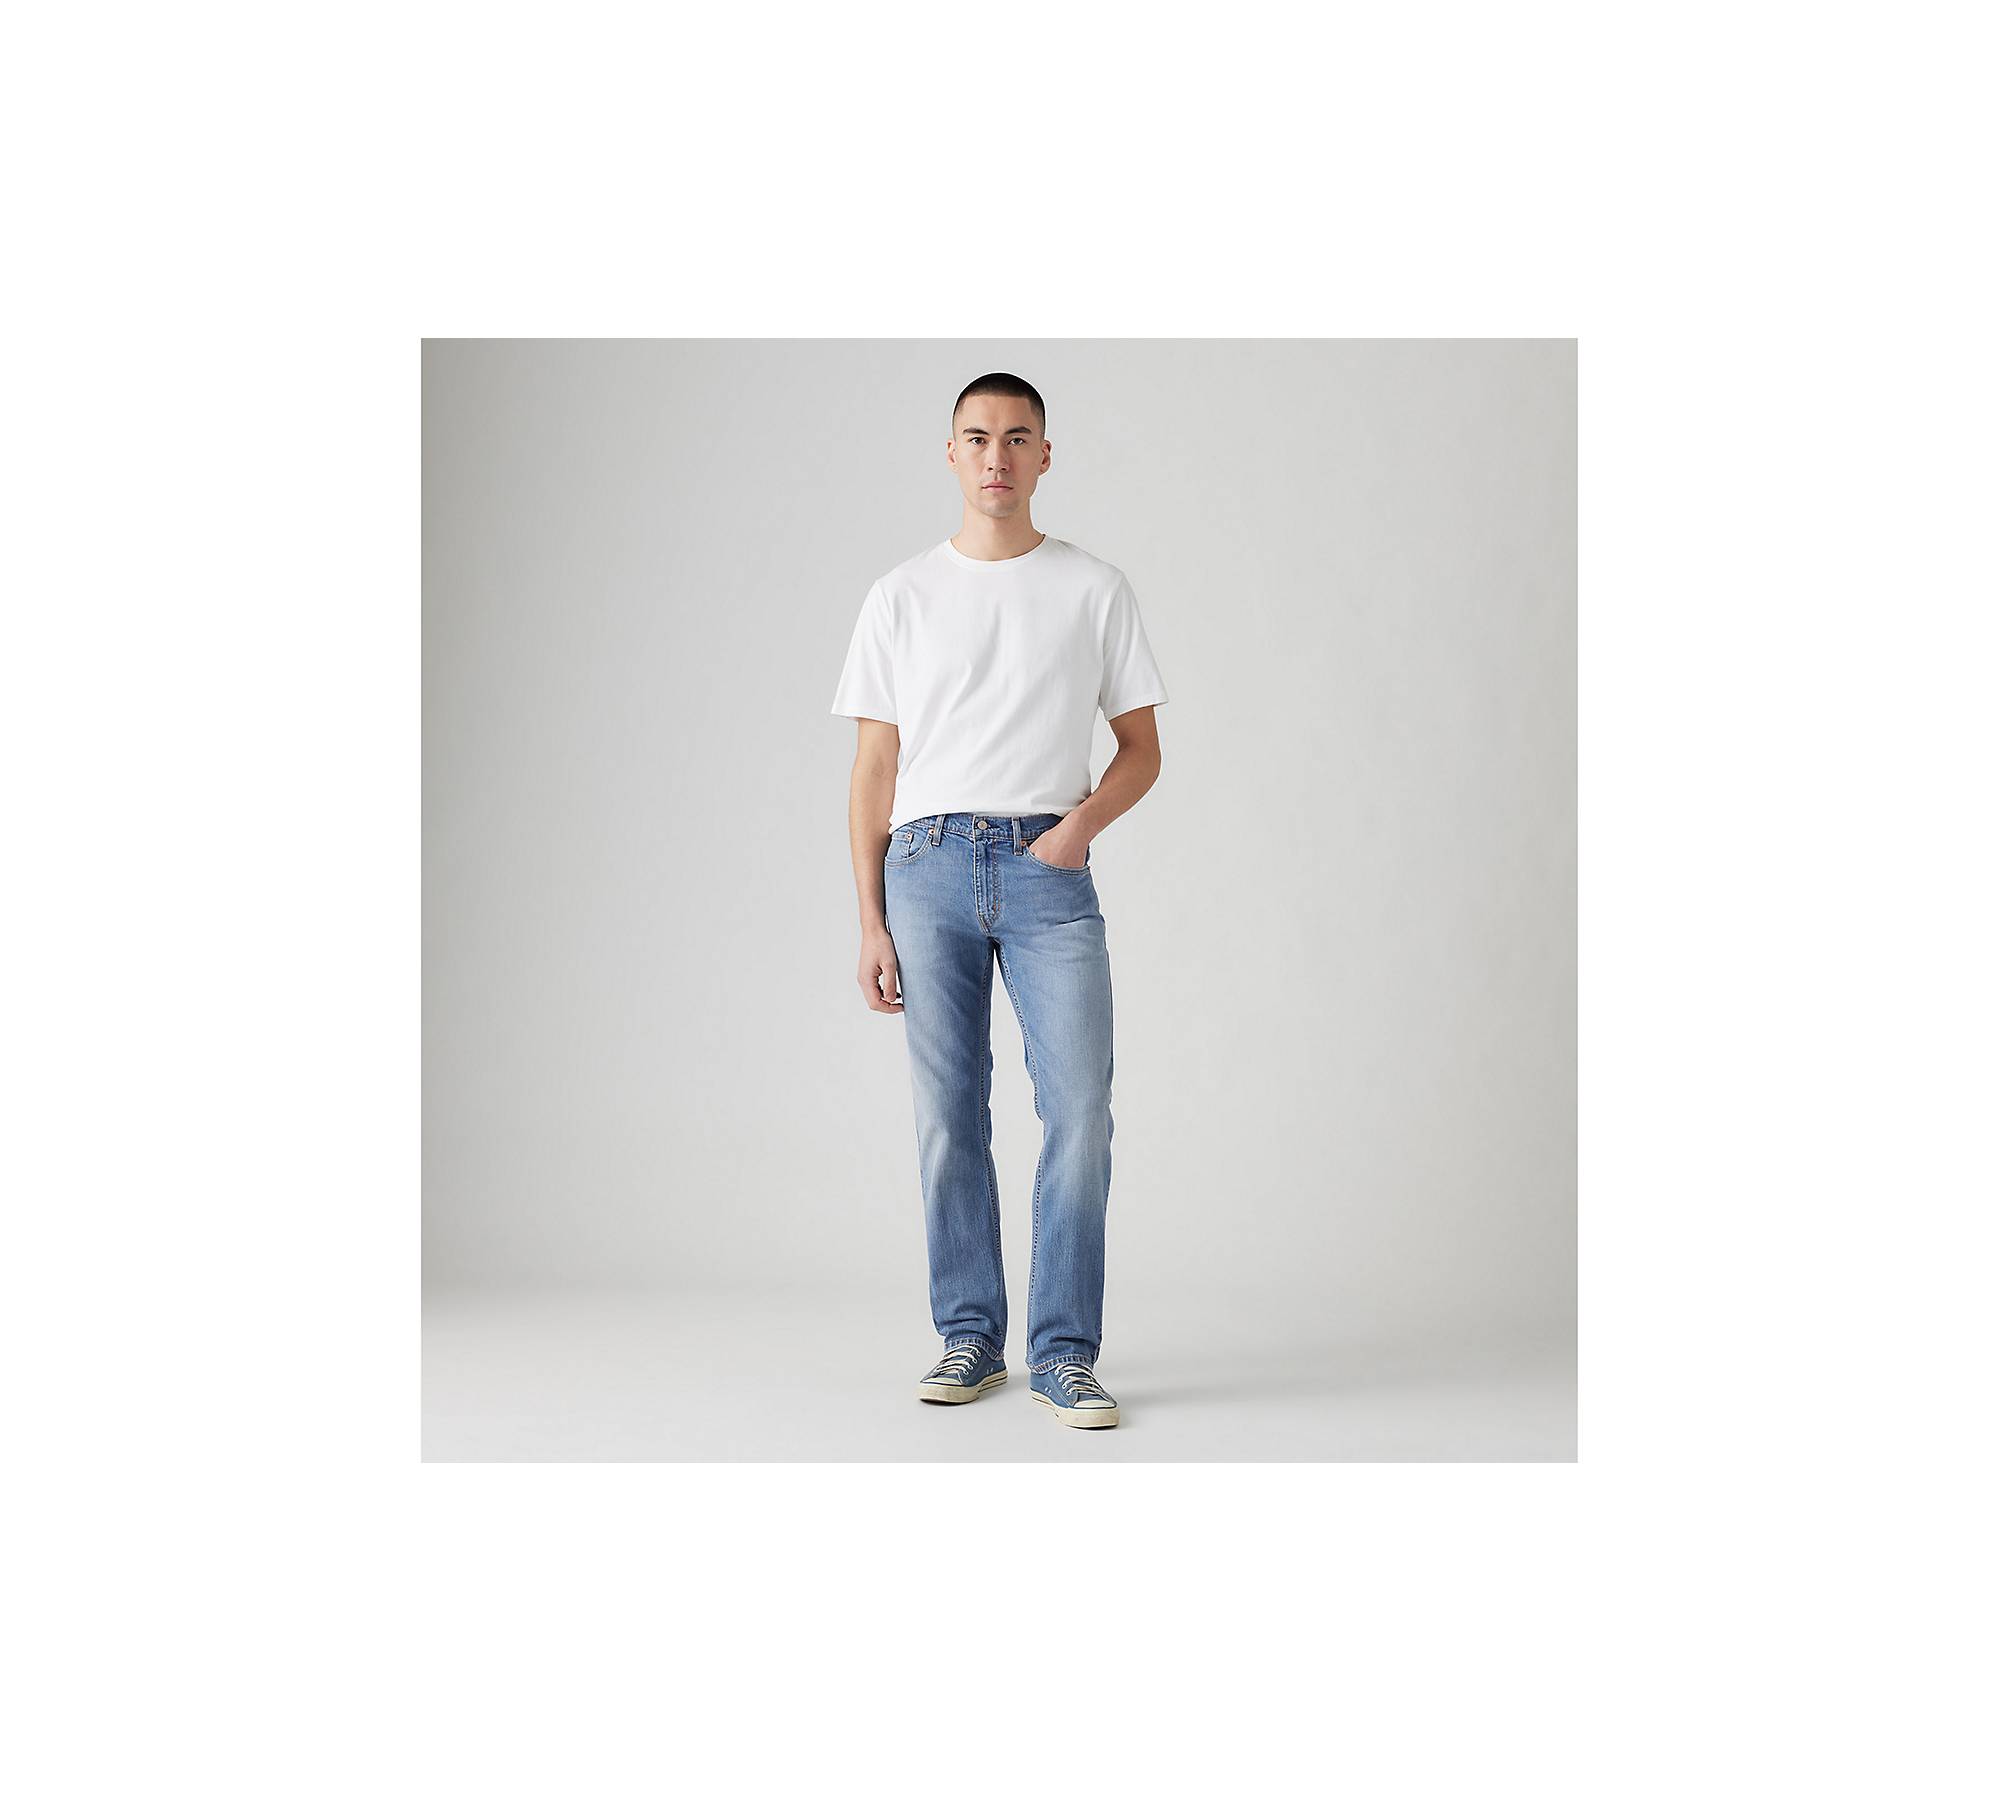 559™ Relaxed Straight Fit - Medium Wash | Levi's® US